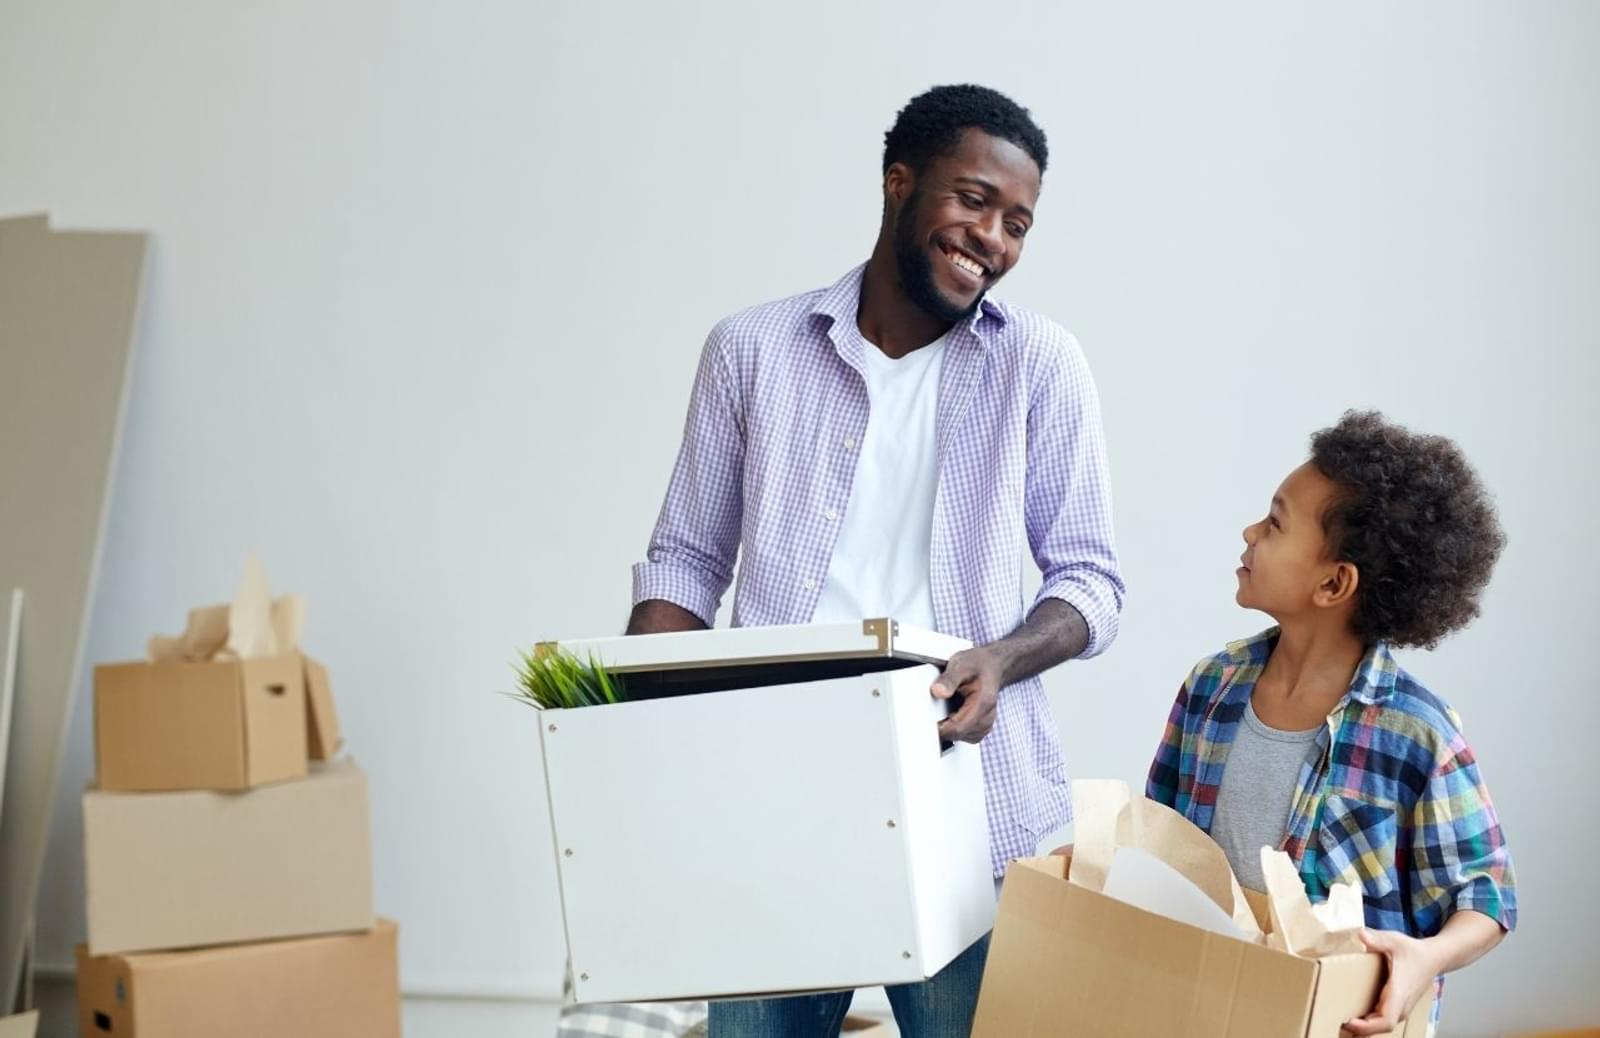 Father smiling at child as they move boxes in new house